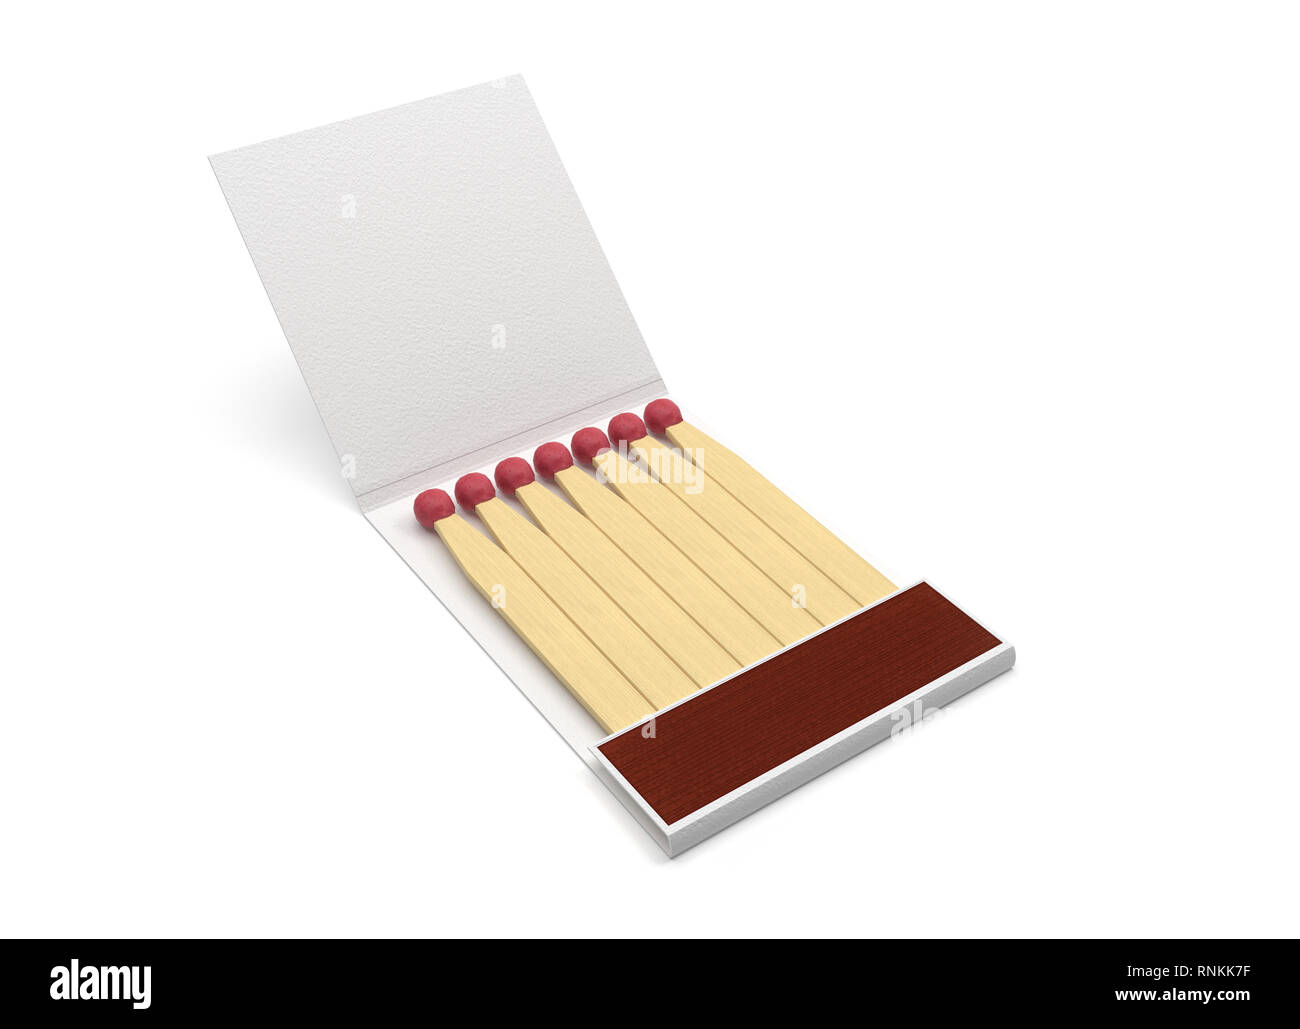 Matches. Box mockup. 3d rendering illustration isolated Stock Photo